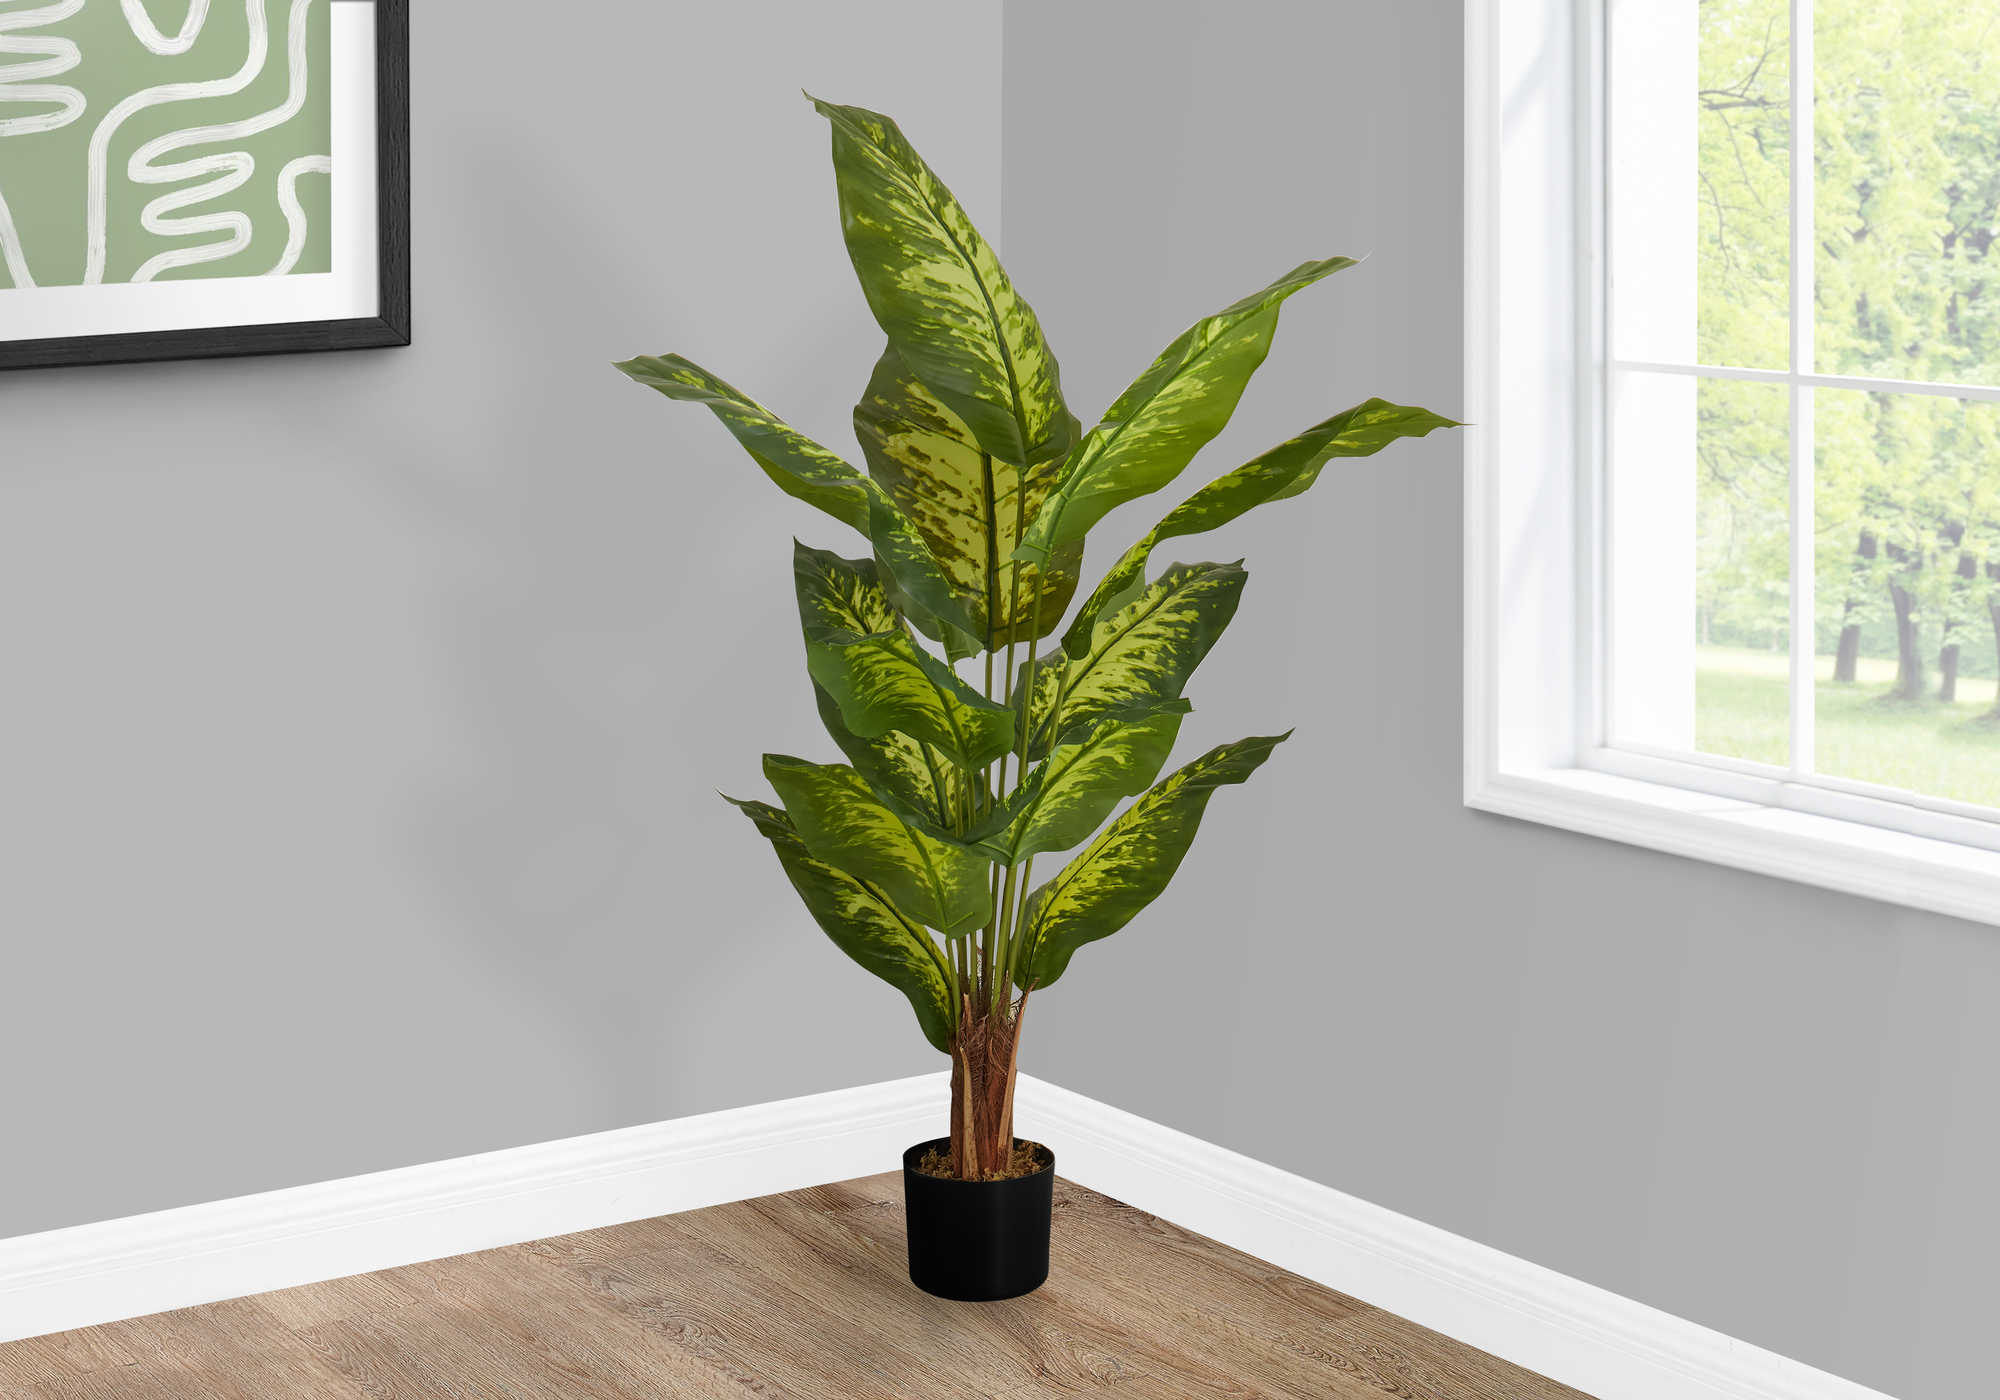 ARTIFICIAL PLANT - 47"H / INDOOR EVERGREEN IN A 5" POT